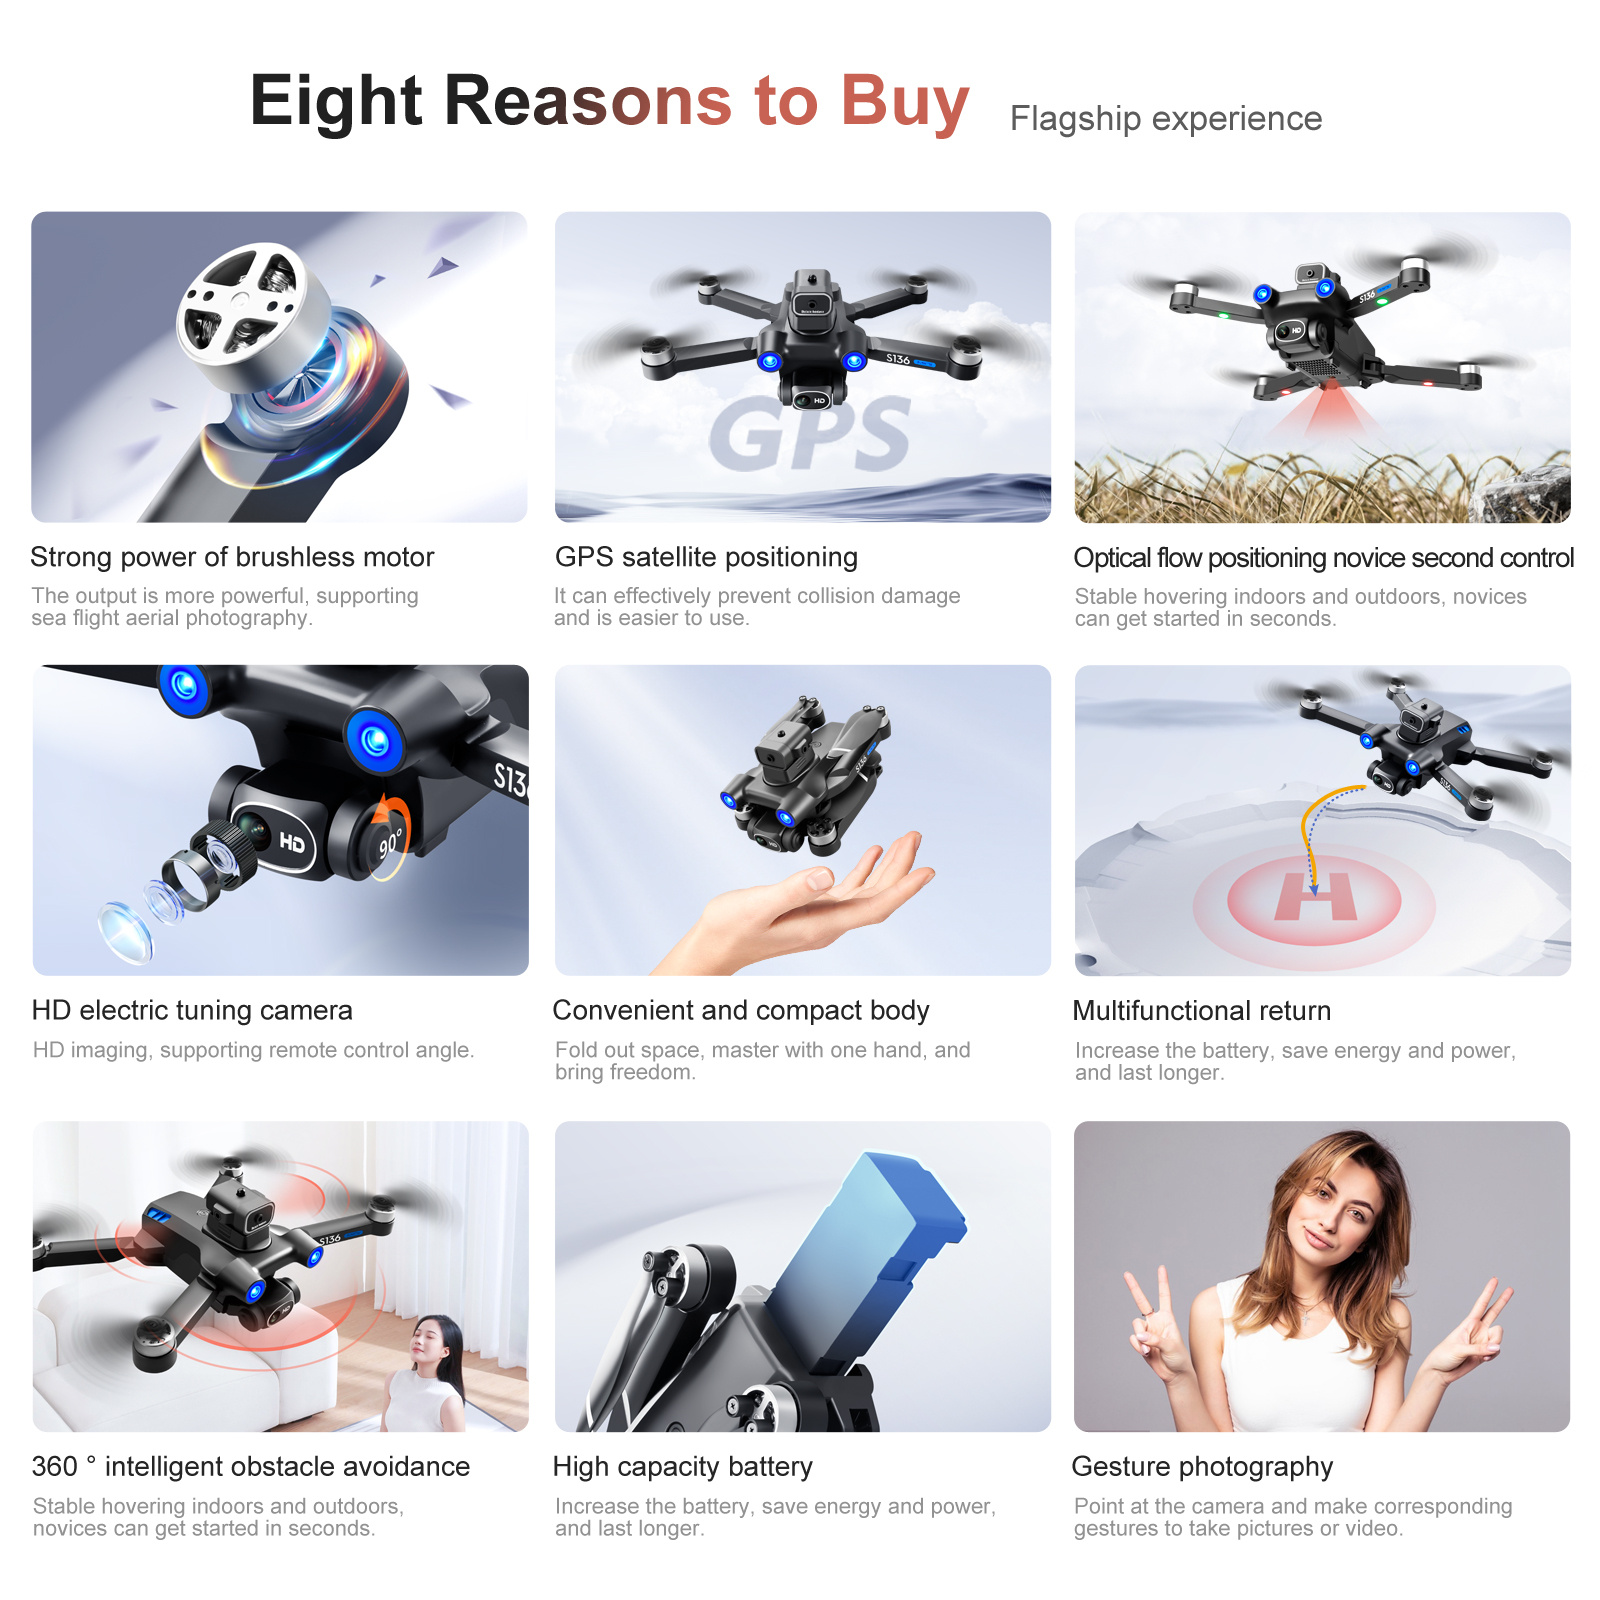 gps positioning drone with brushless motor headless mode intelligent obstacle avoidance optical flow positioning a key return ultra long range intelligent following strong wind resistance details 1